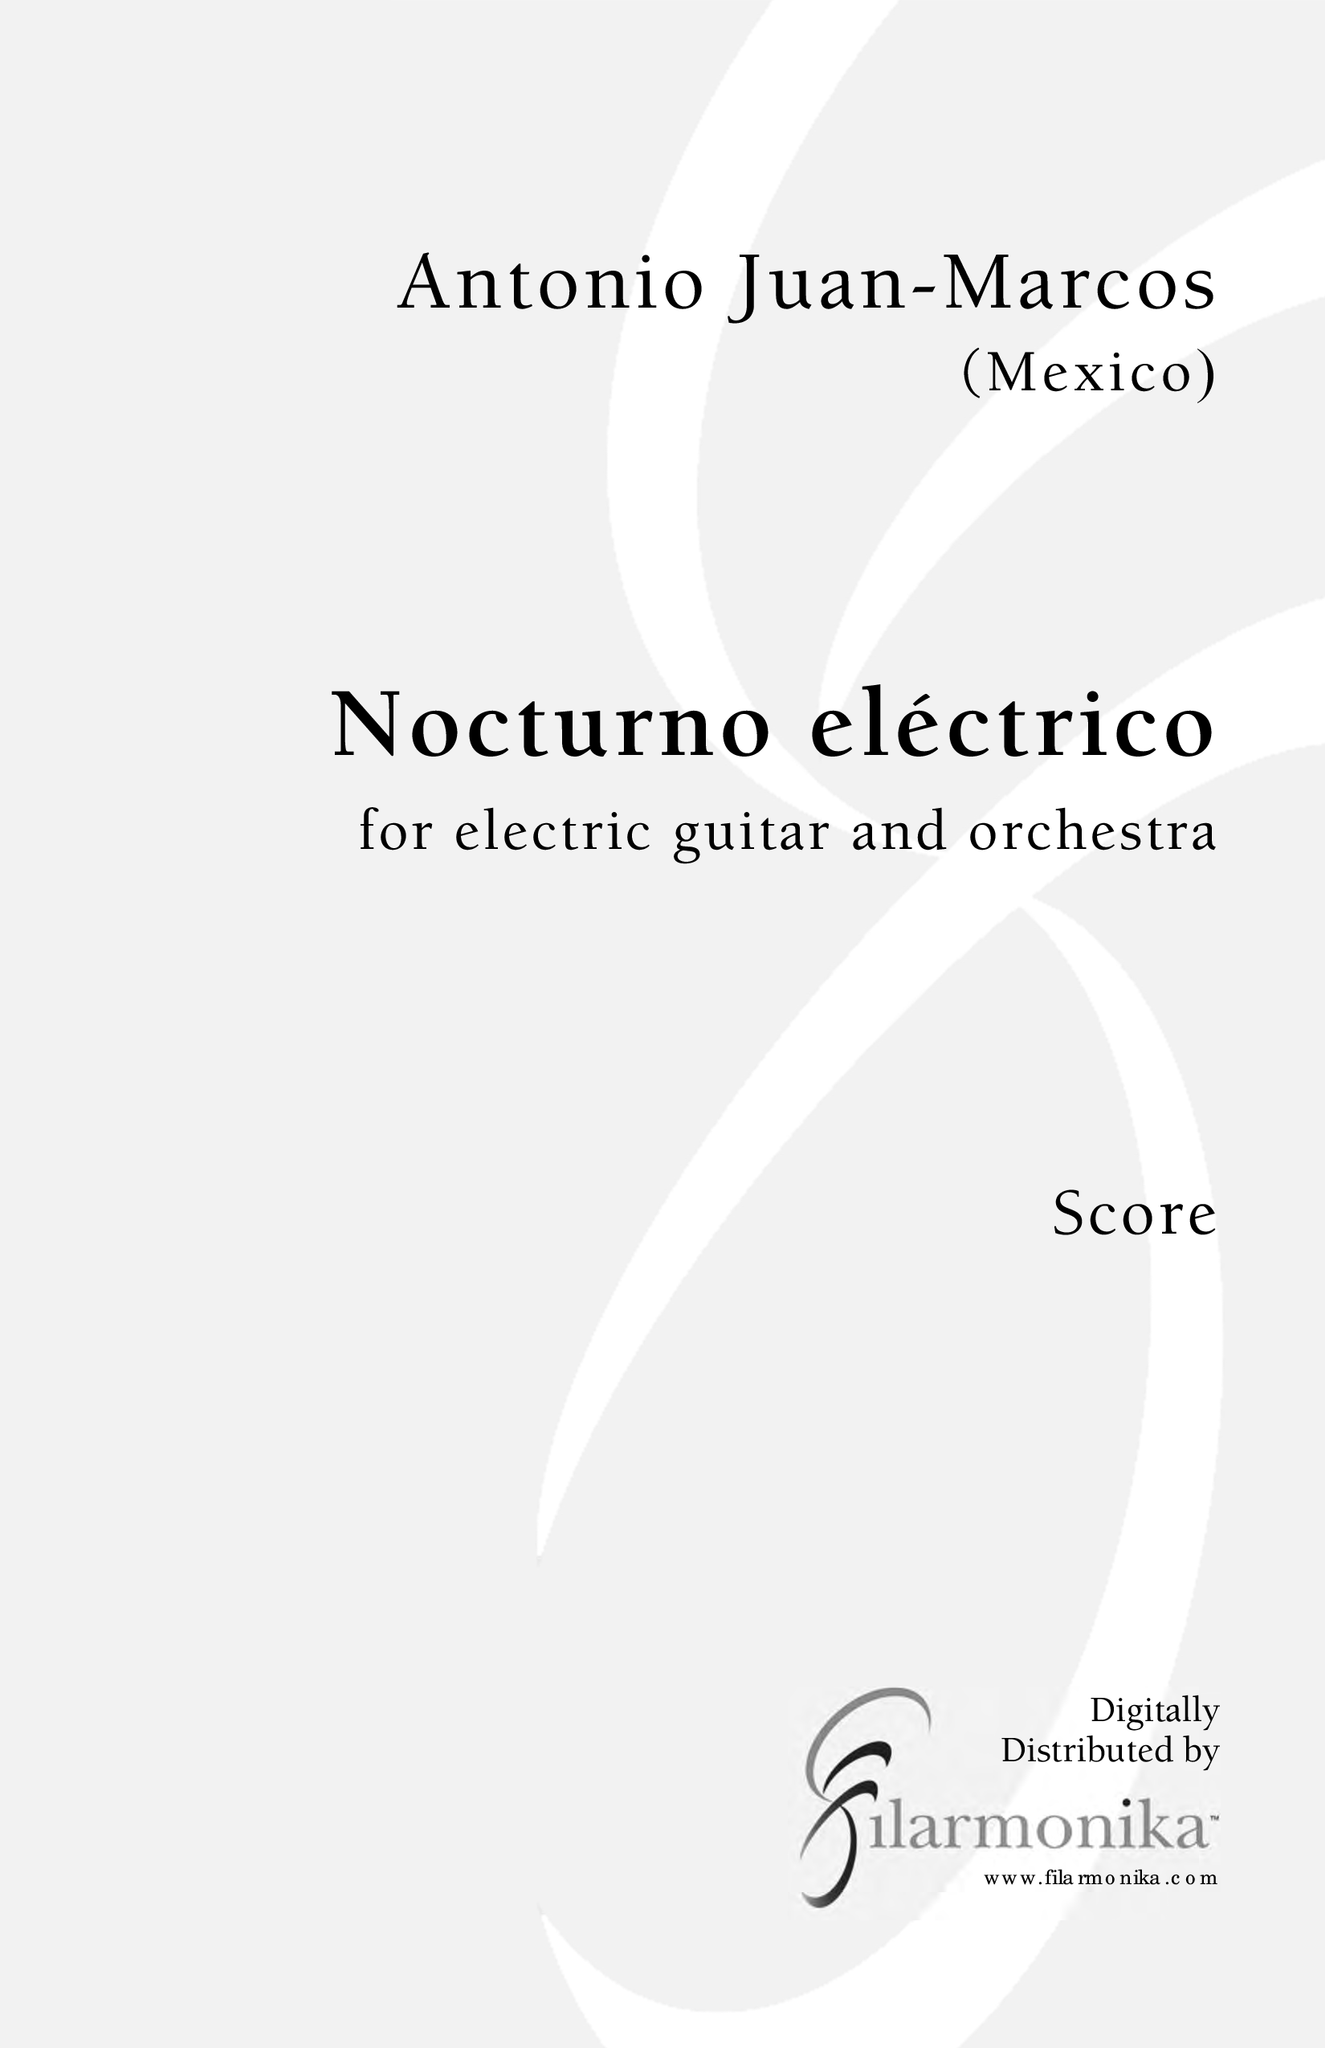 Nocturno eléctrico, for electric guitar and orchestra